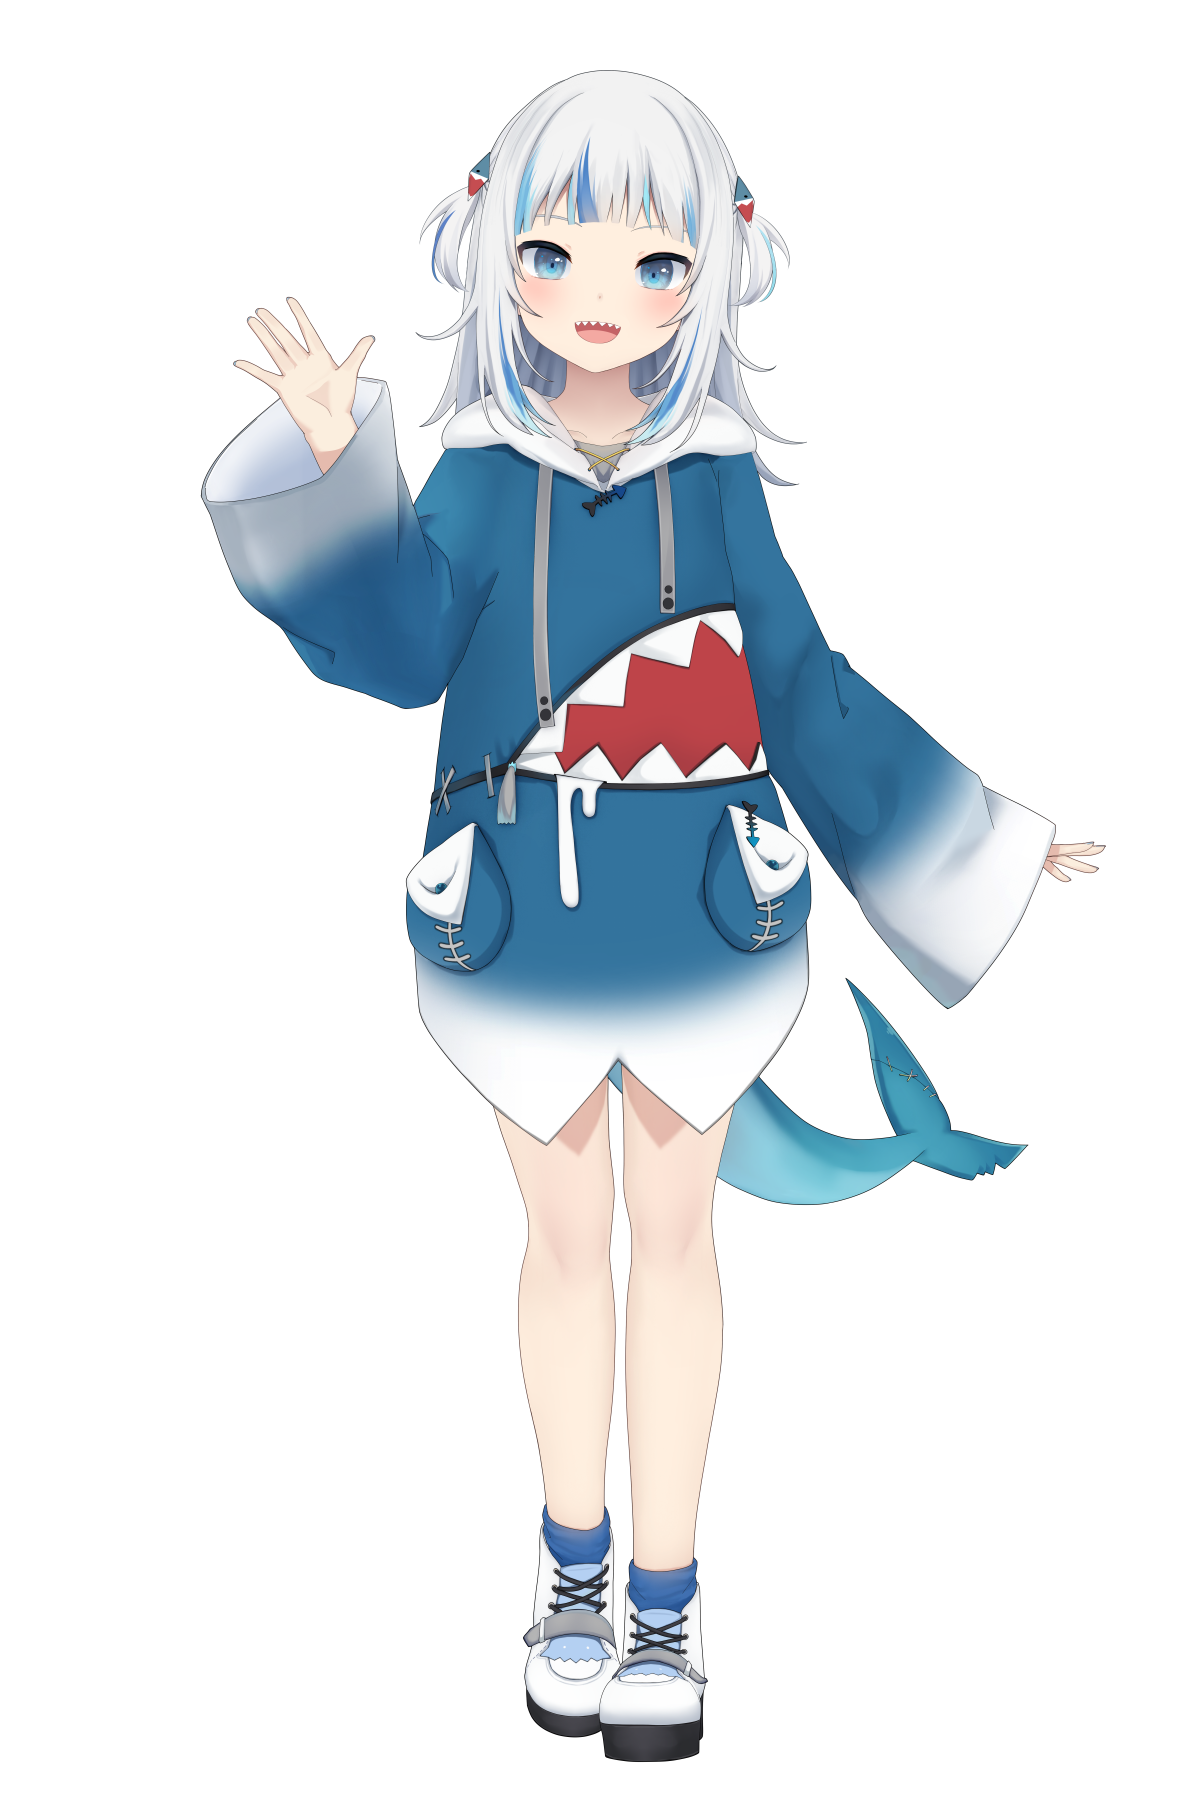 Gawr Gura is a virtual YouTuber, or VTuber, that will be a part of a promotion during Friday's game at Dodger Stadium.